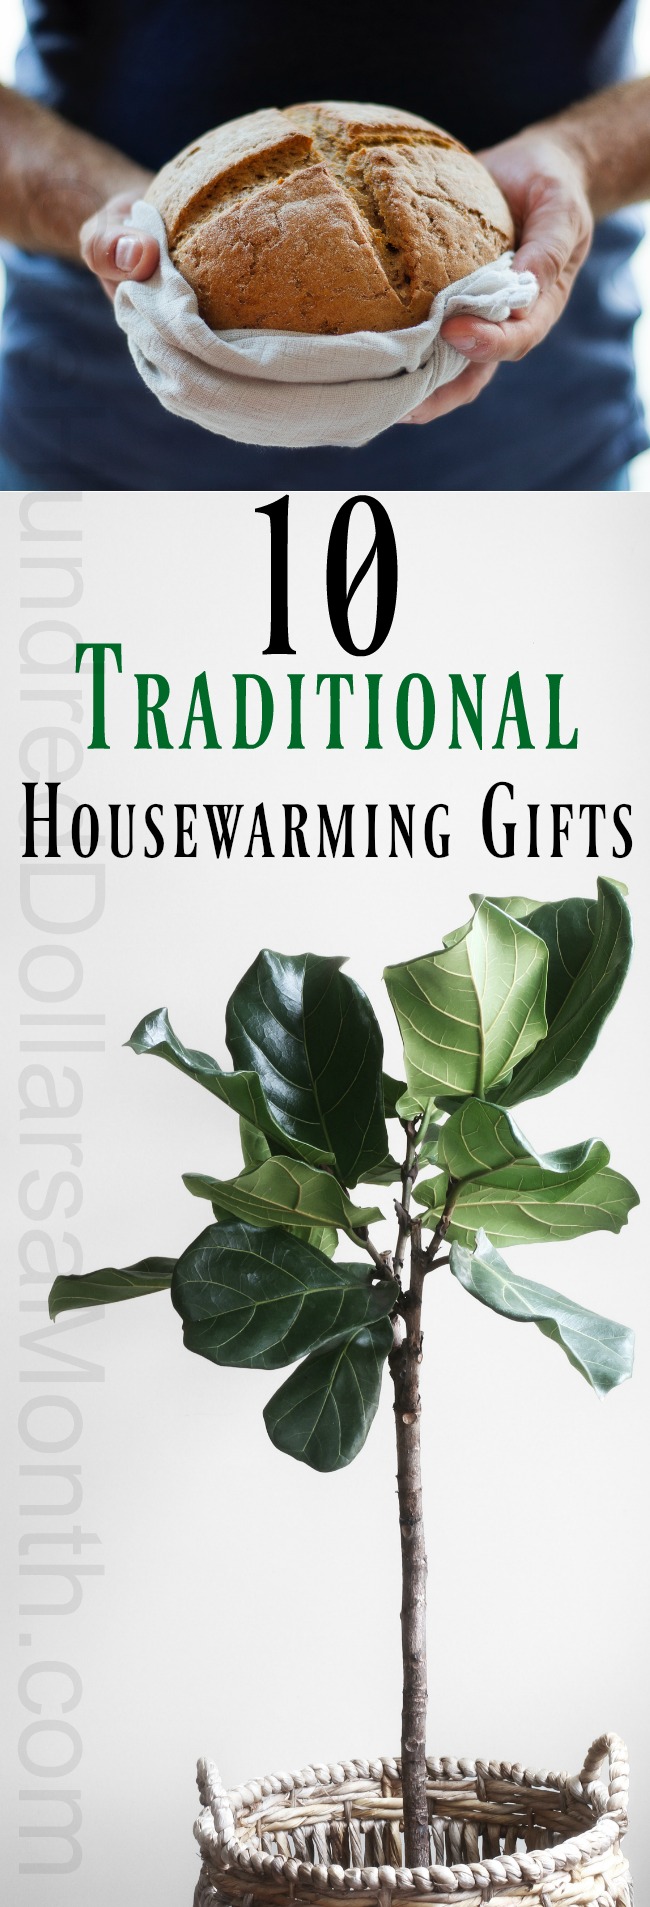 10 Traditional Housewarming Gifts